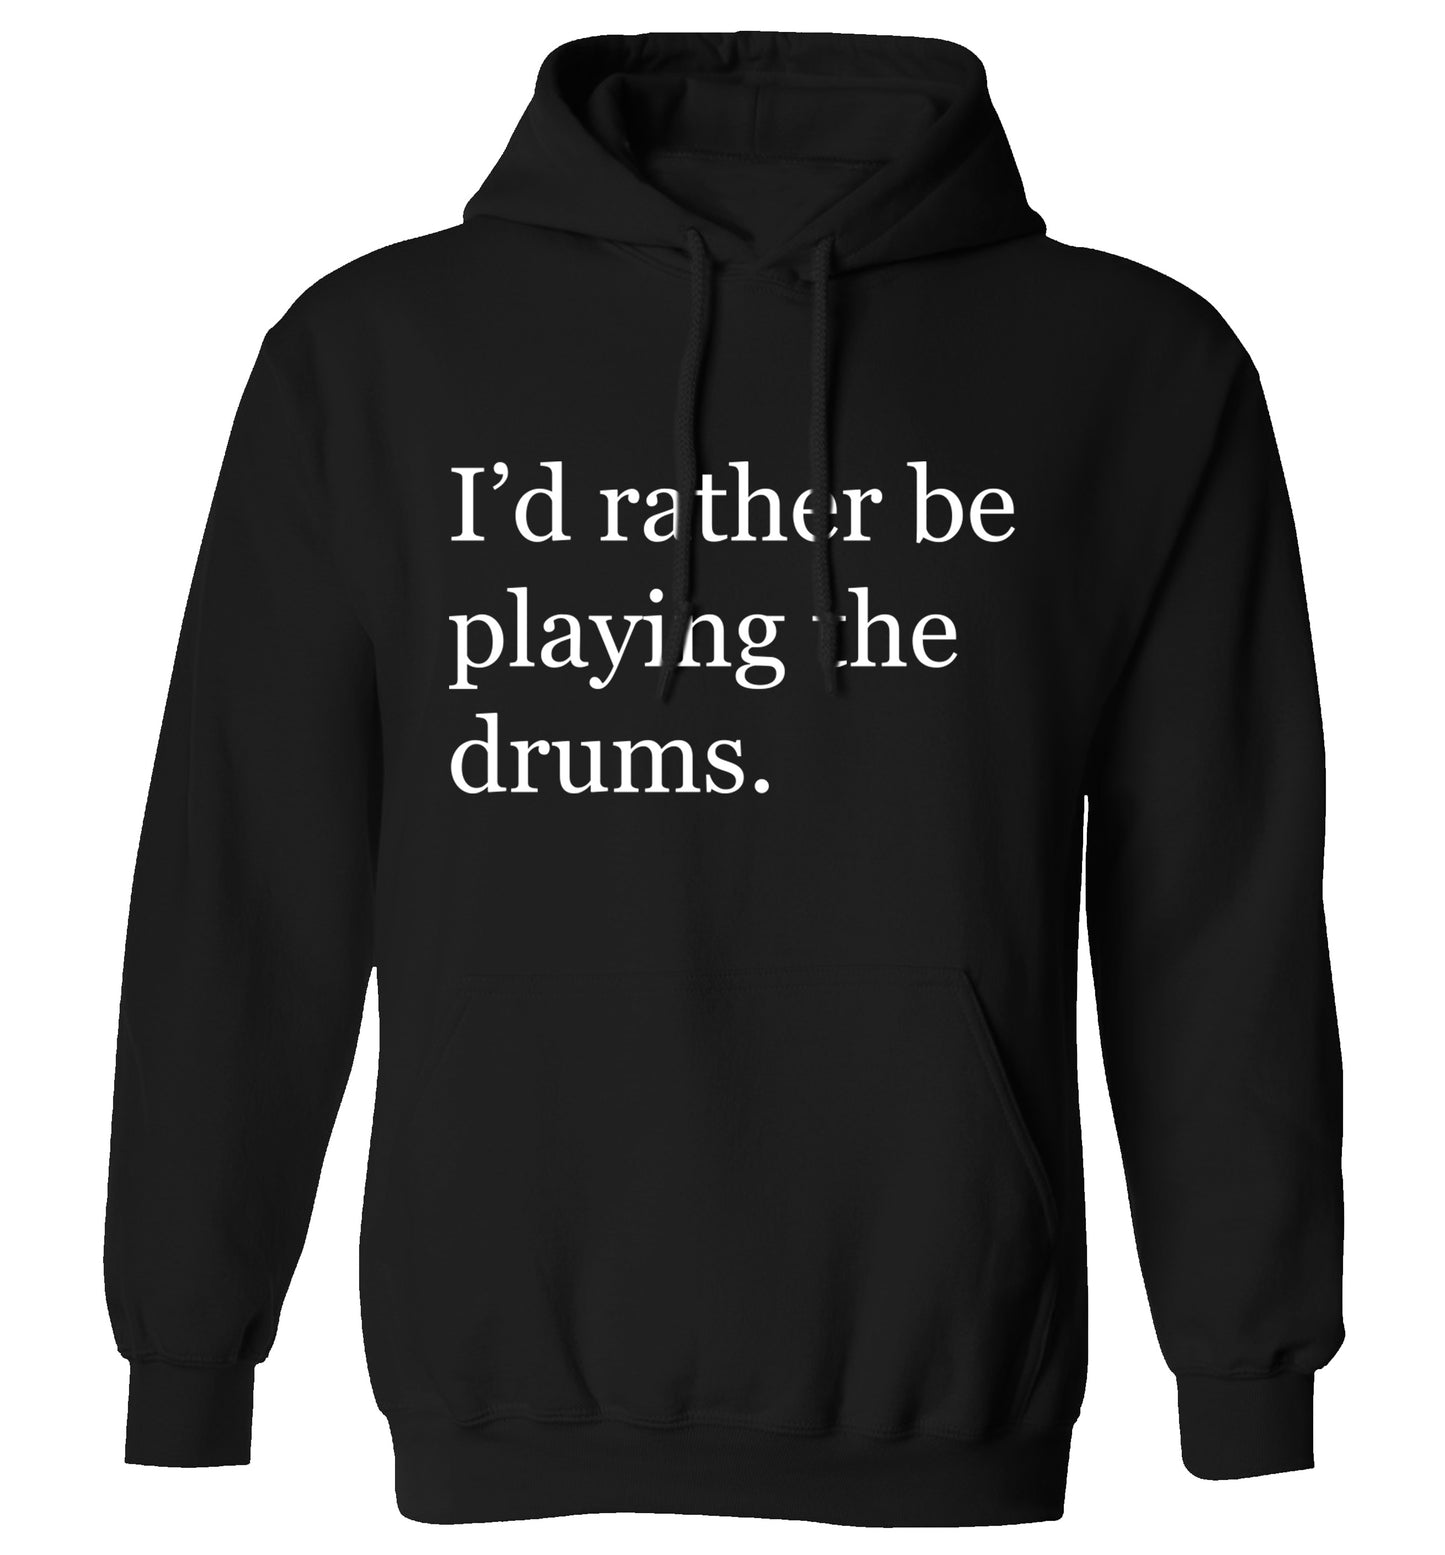 I'd rather be playing the drums adults unisexblack hoodie 2XL